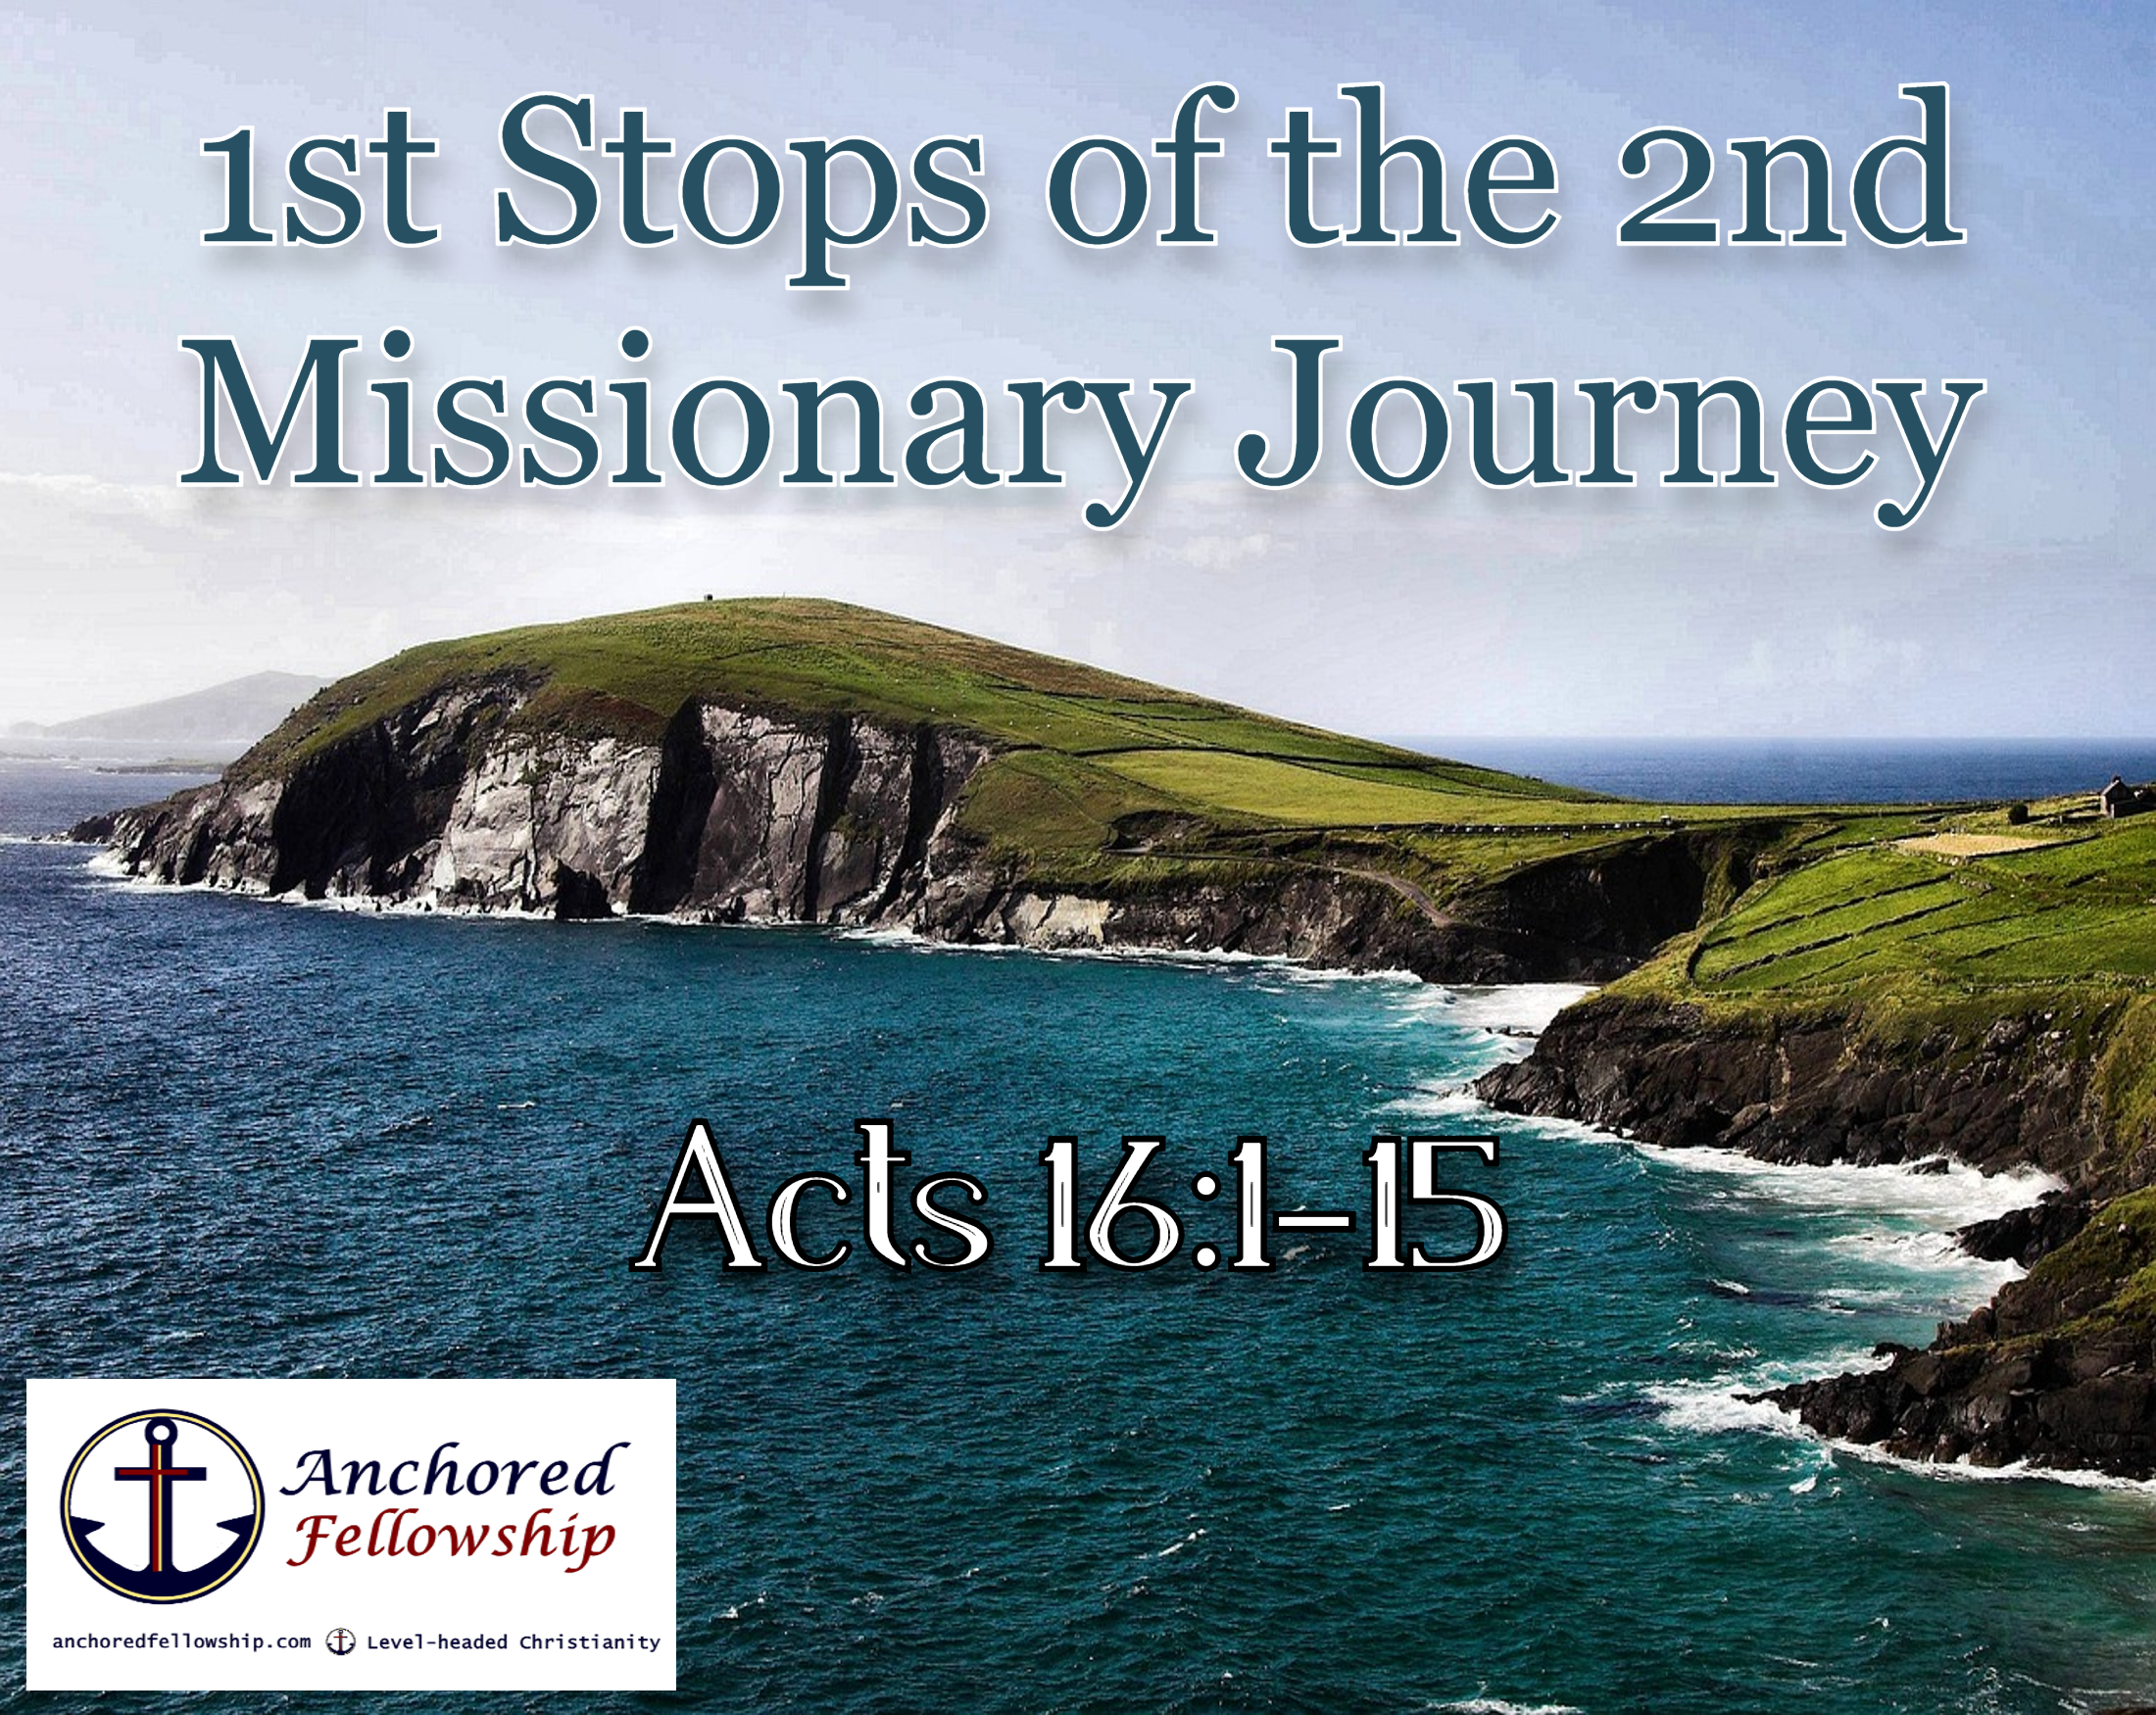 1st Stops of the 2nd Missionary Journey Image